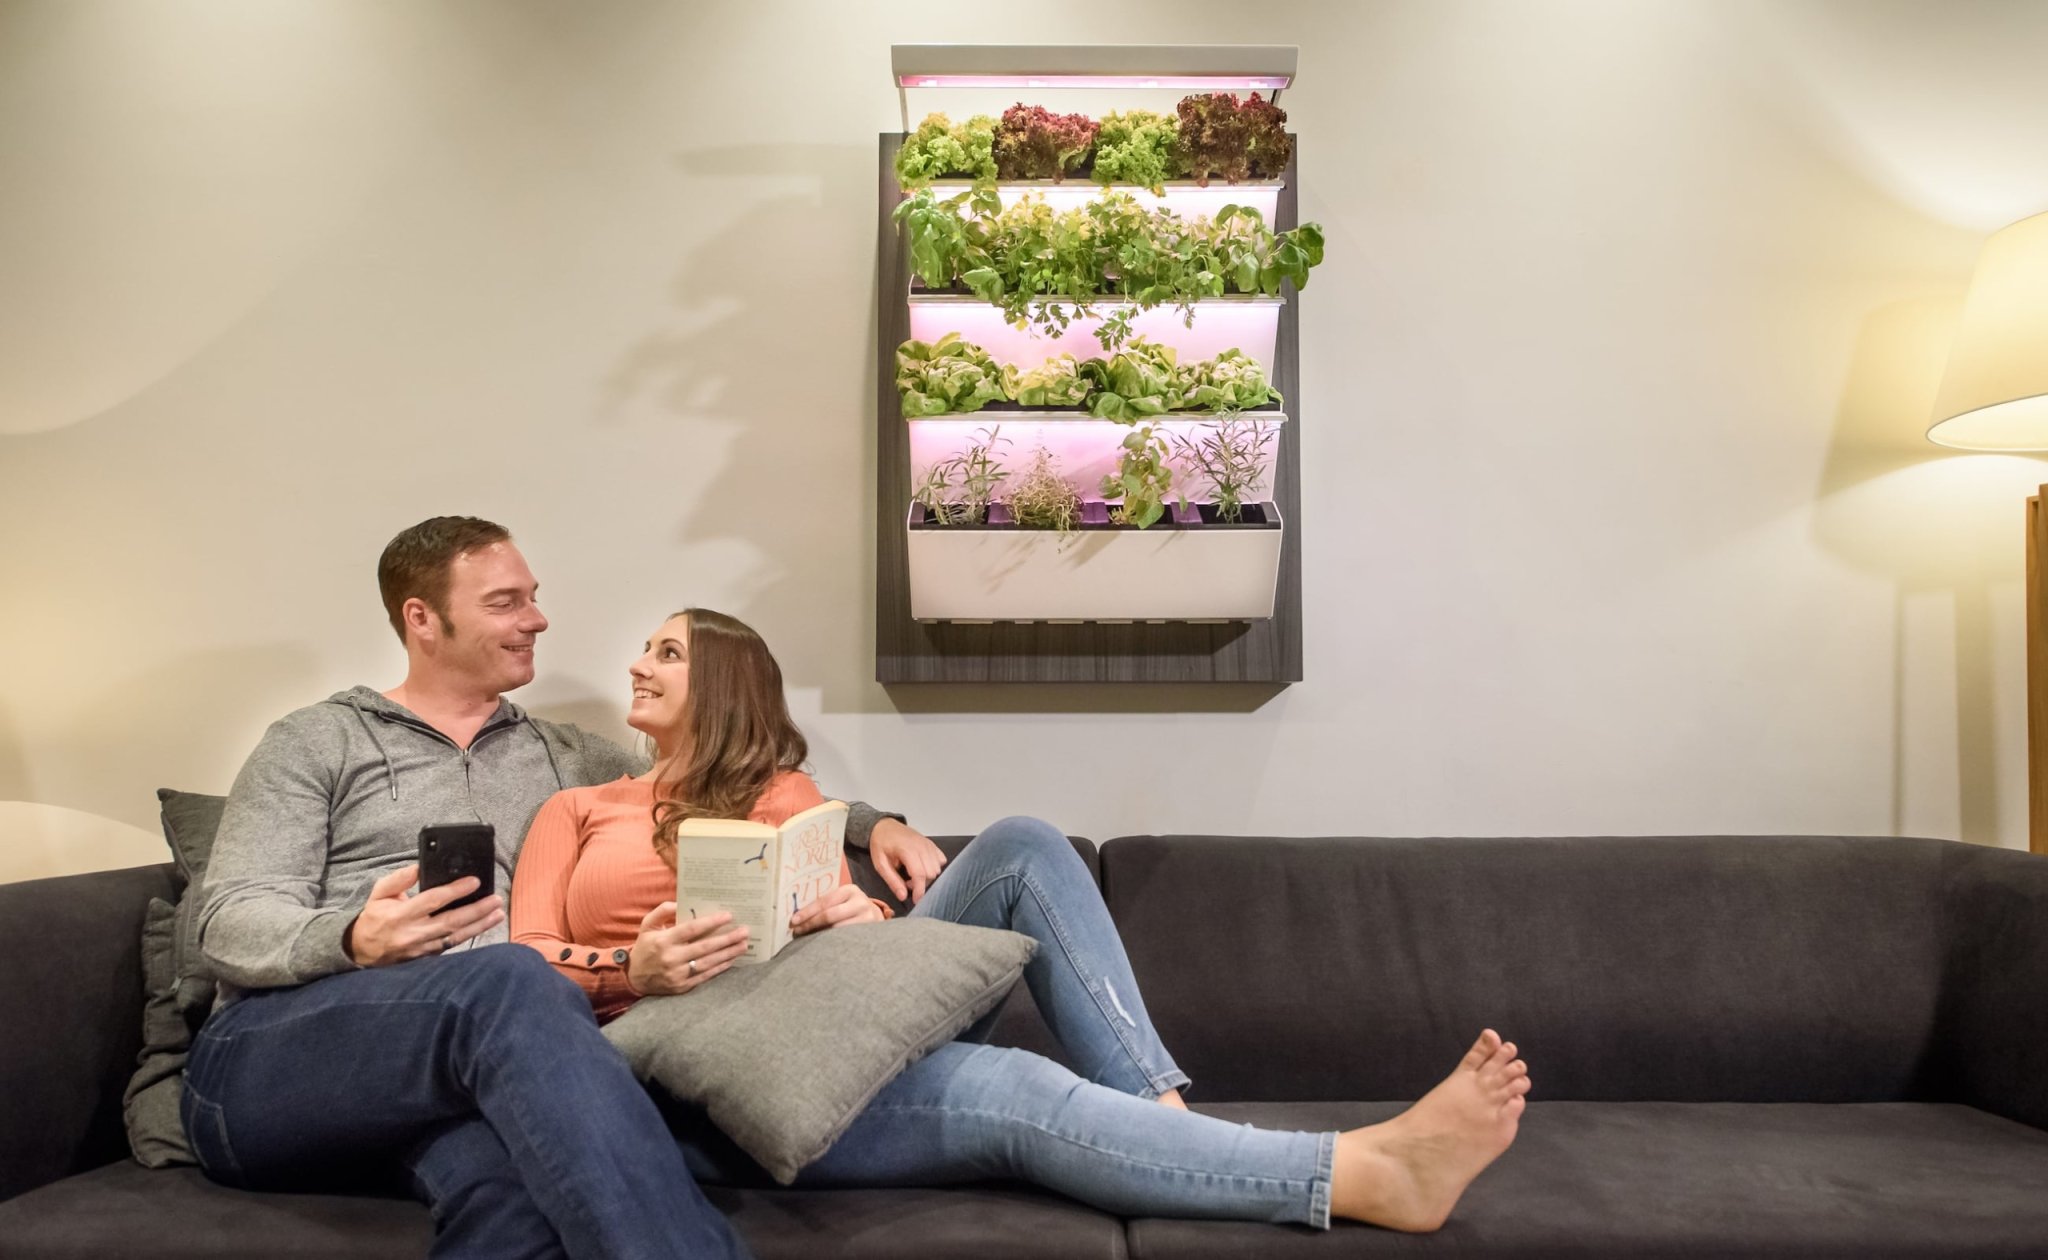 Herbitat Smart Hydroponic Indoor Garden lets you grow your own produce easily at home